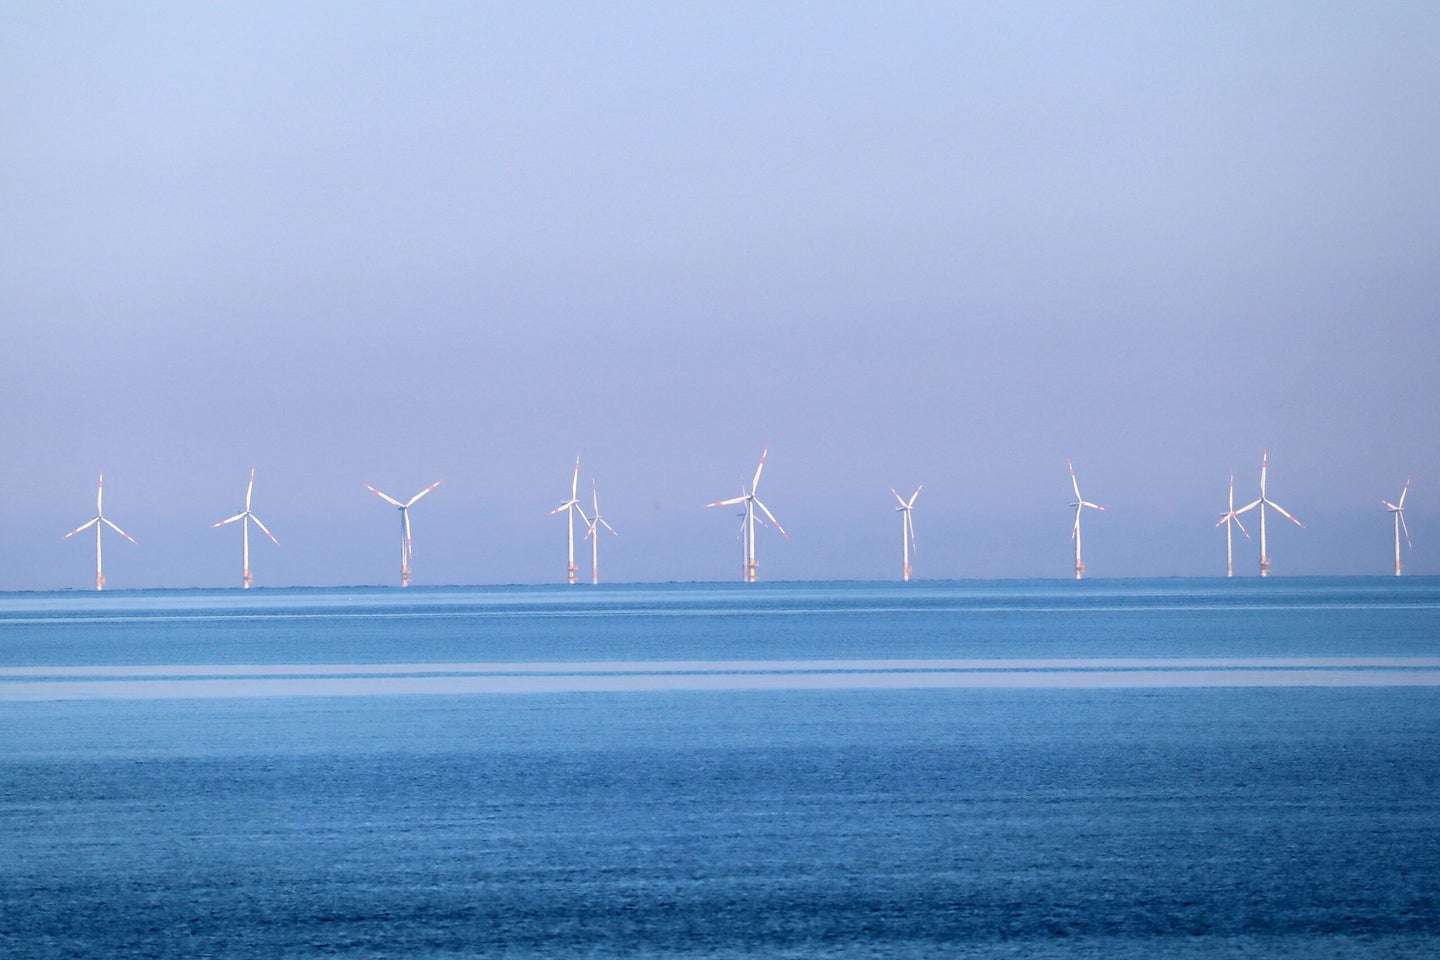 rows of offshore wind turbines